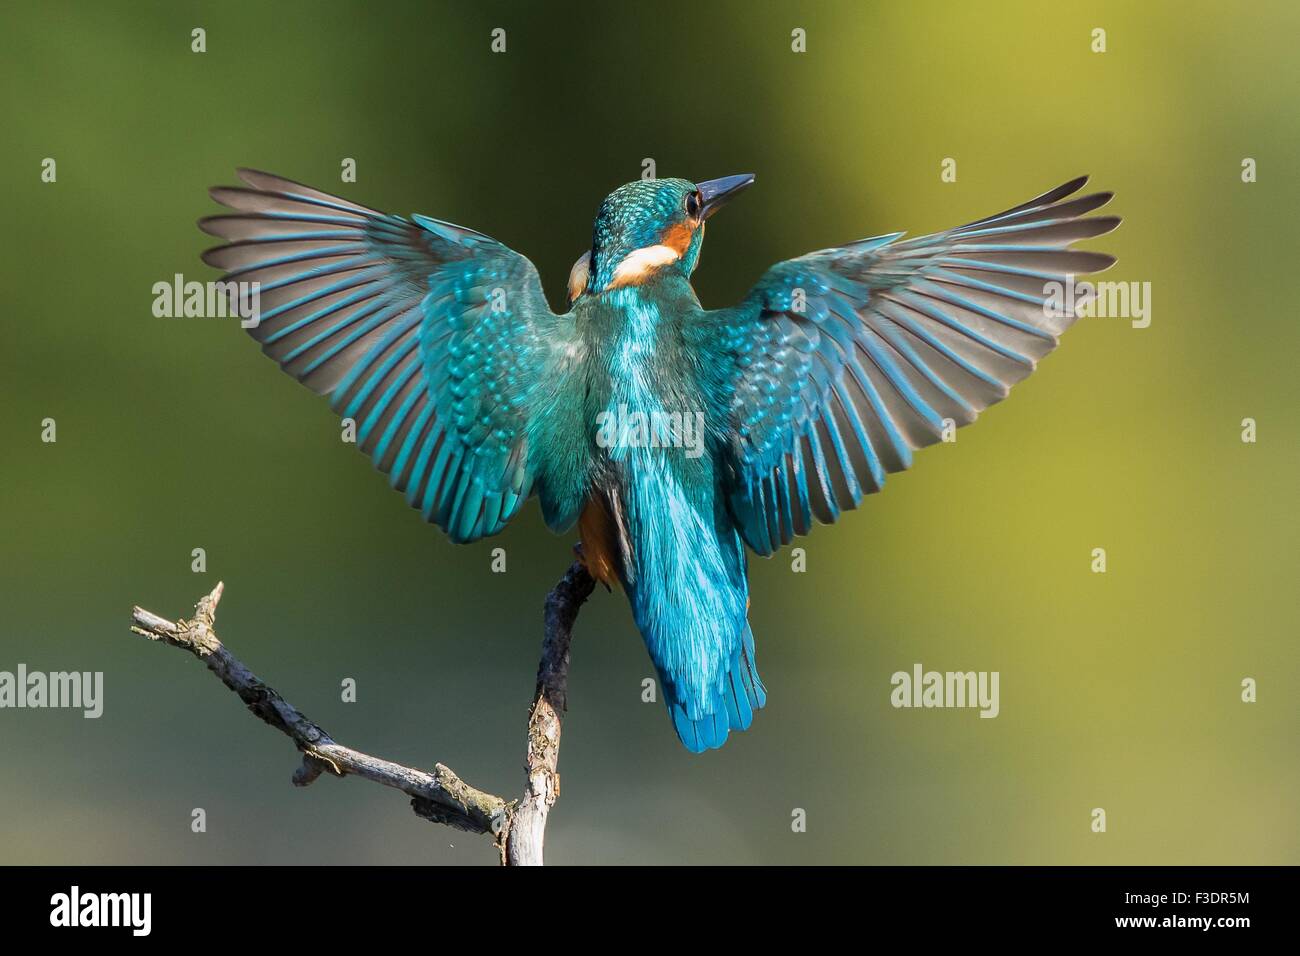 Common kingfisher (Alcedo atthis), approaching a branch, wings spread, Hesse, Germany Stock Photo